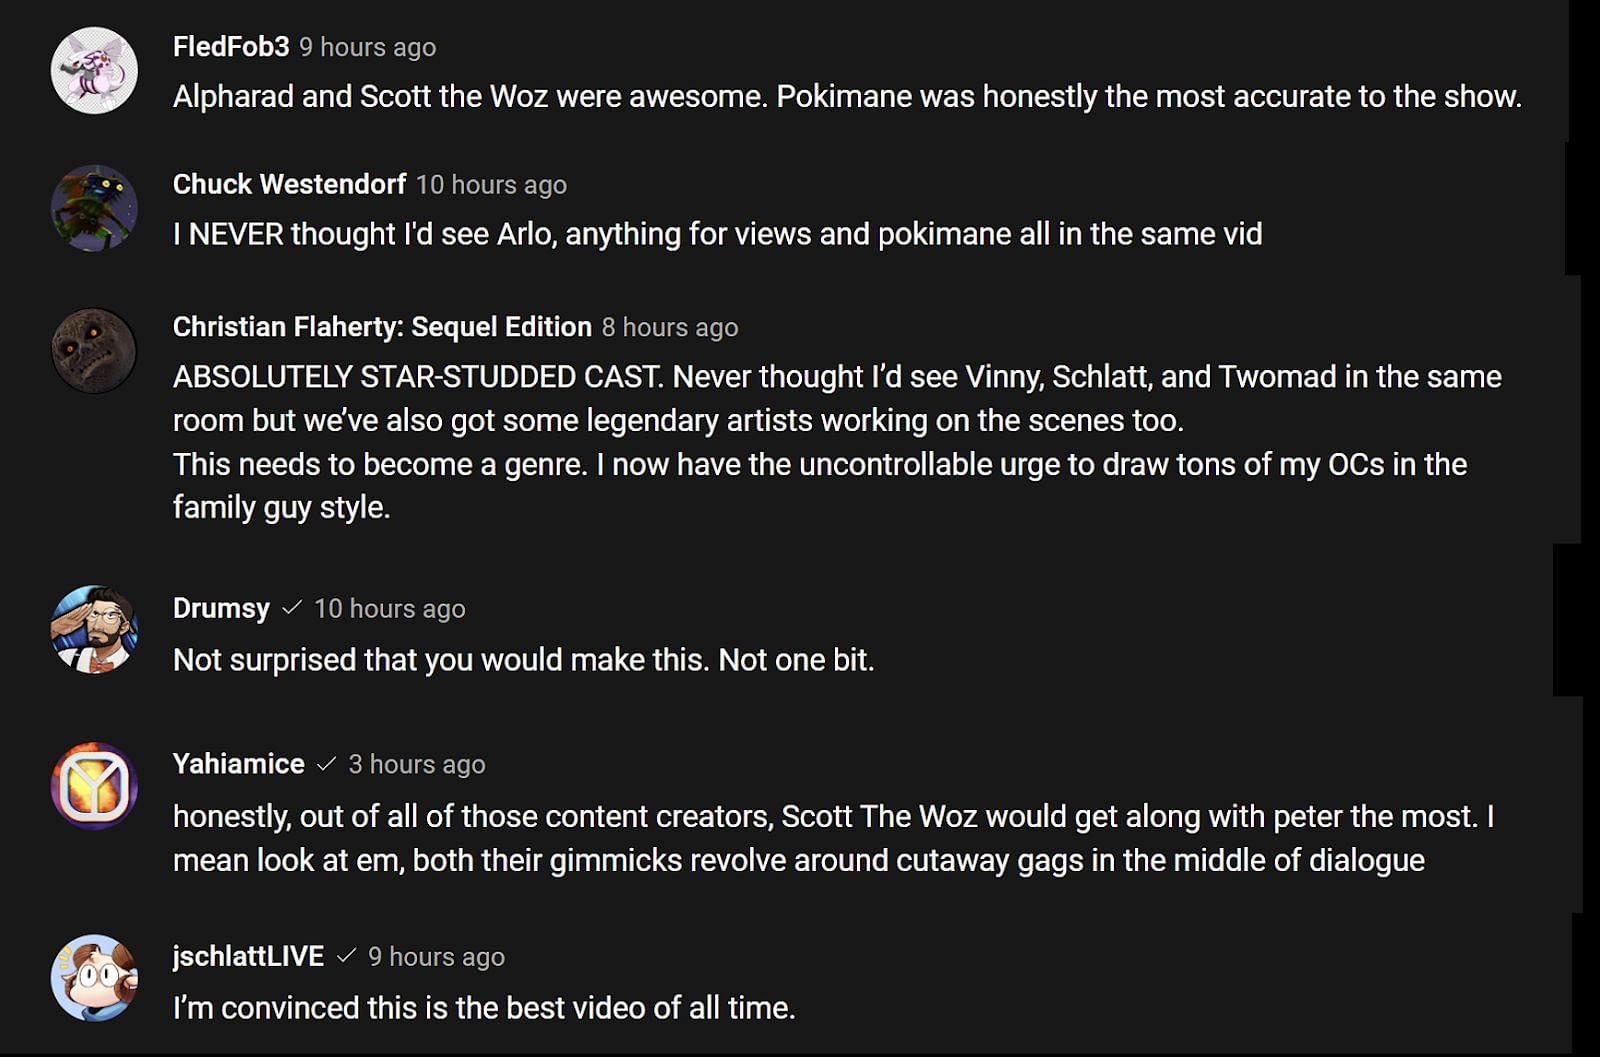 Viewers and fans reacting to the well made Family Guy video and applauding the content creator (Images via RubberRoss/YouTube comment section)